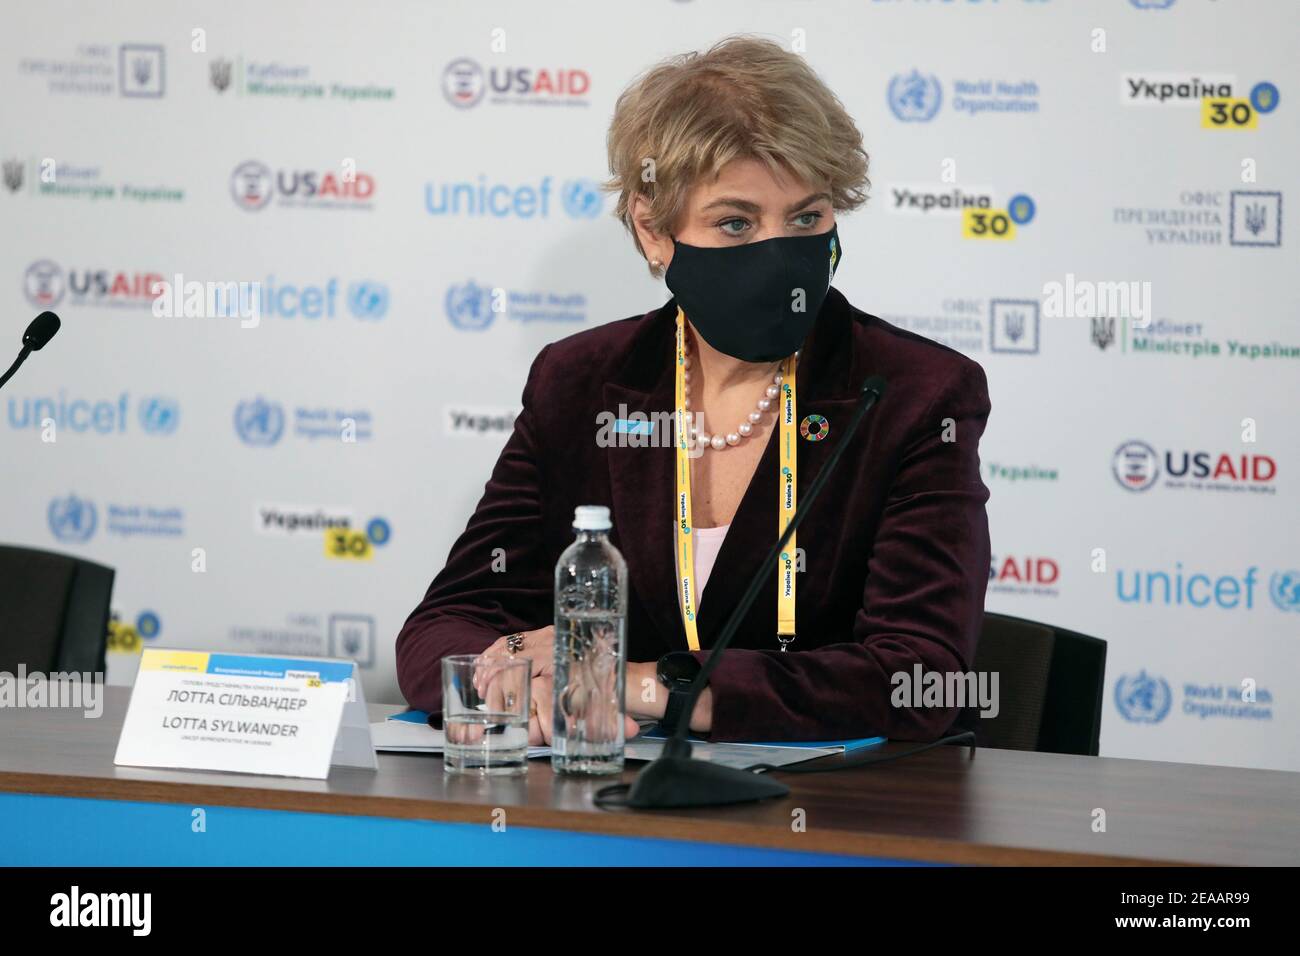 Non Exclusive: KYIV, UKRAINE - FEBRUARY 8, 2021 - UNICEF Representative in Ukraine Lotta Sylwander is pictured during a briefing held on the sidelines Stock Photo